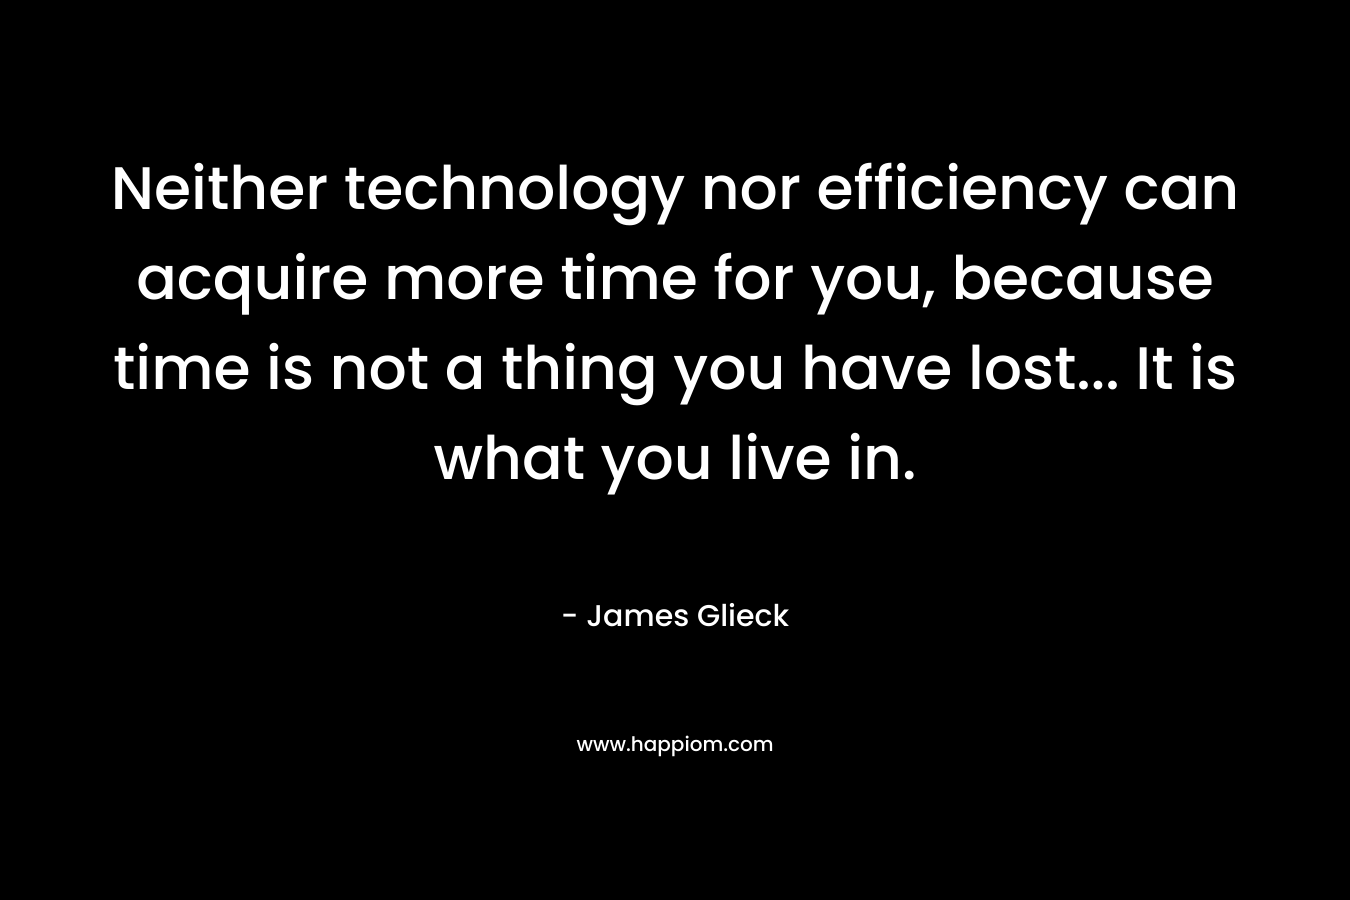 Neither technology nor efficiency can acquire more time for you, because time is not a thing you have lost… It is what you live in. – James Glieck